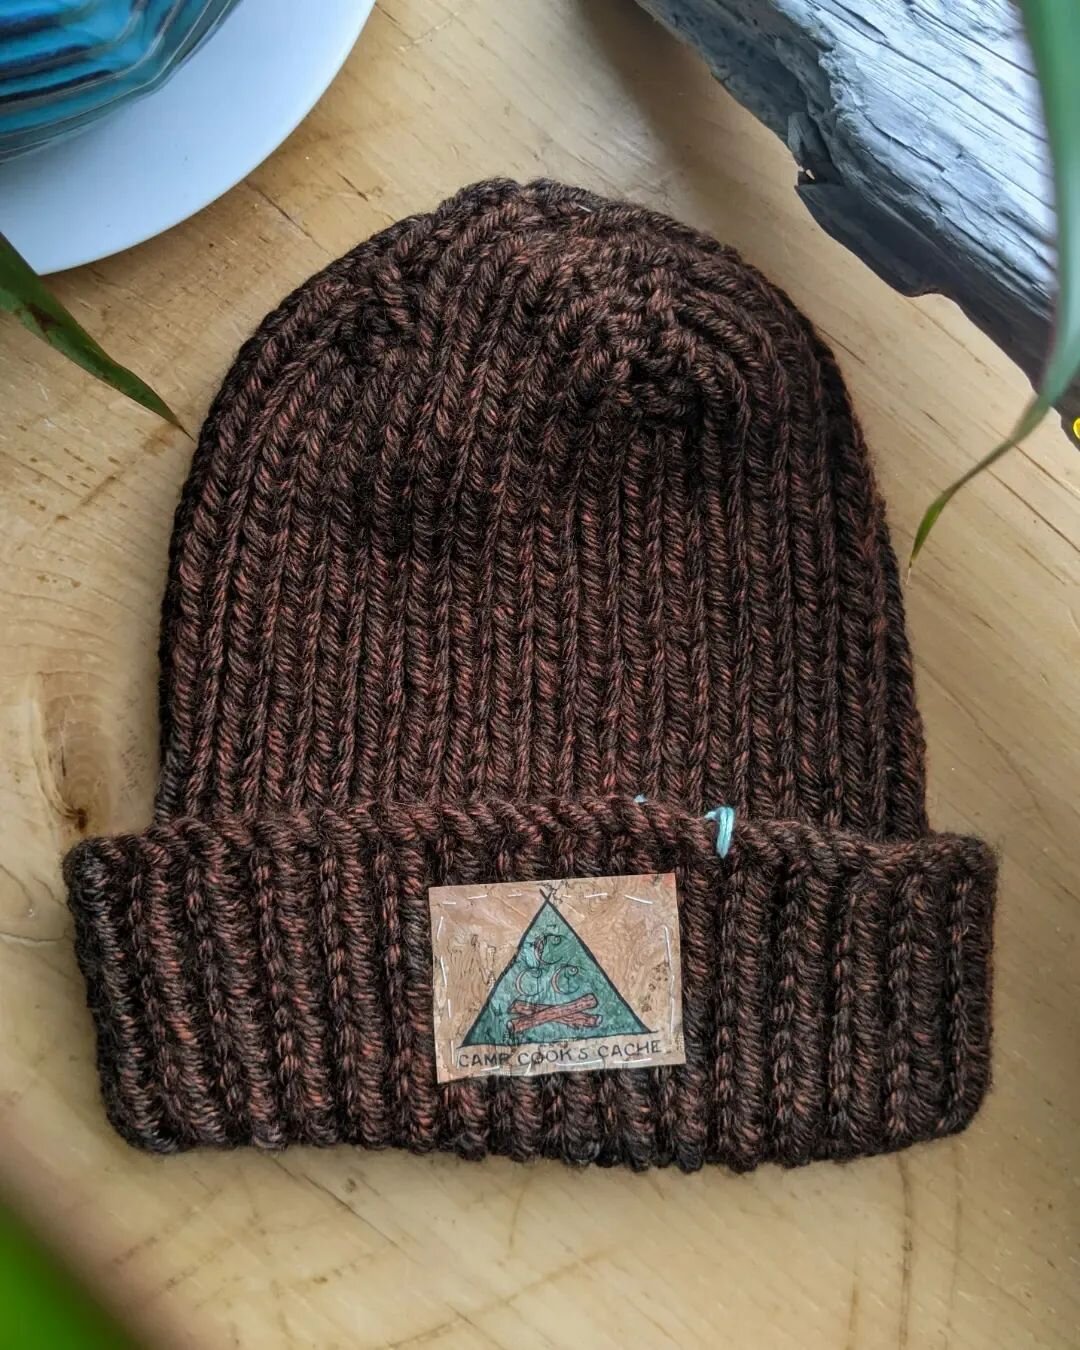 Keep an eye out for our toques today! 

Listing them online tonight &amp; will be doing a FLASH SALE on them over the next couple of days as a holiday treat! ☺️

Materials:
&bull; Merino Wool;
&bull; Alpaca Wool; or
&bull; Acrylic

Specific sizes &am